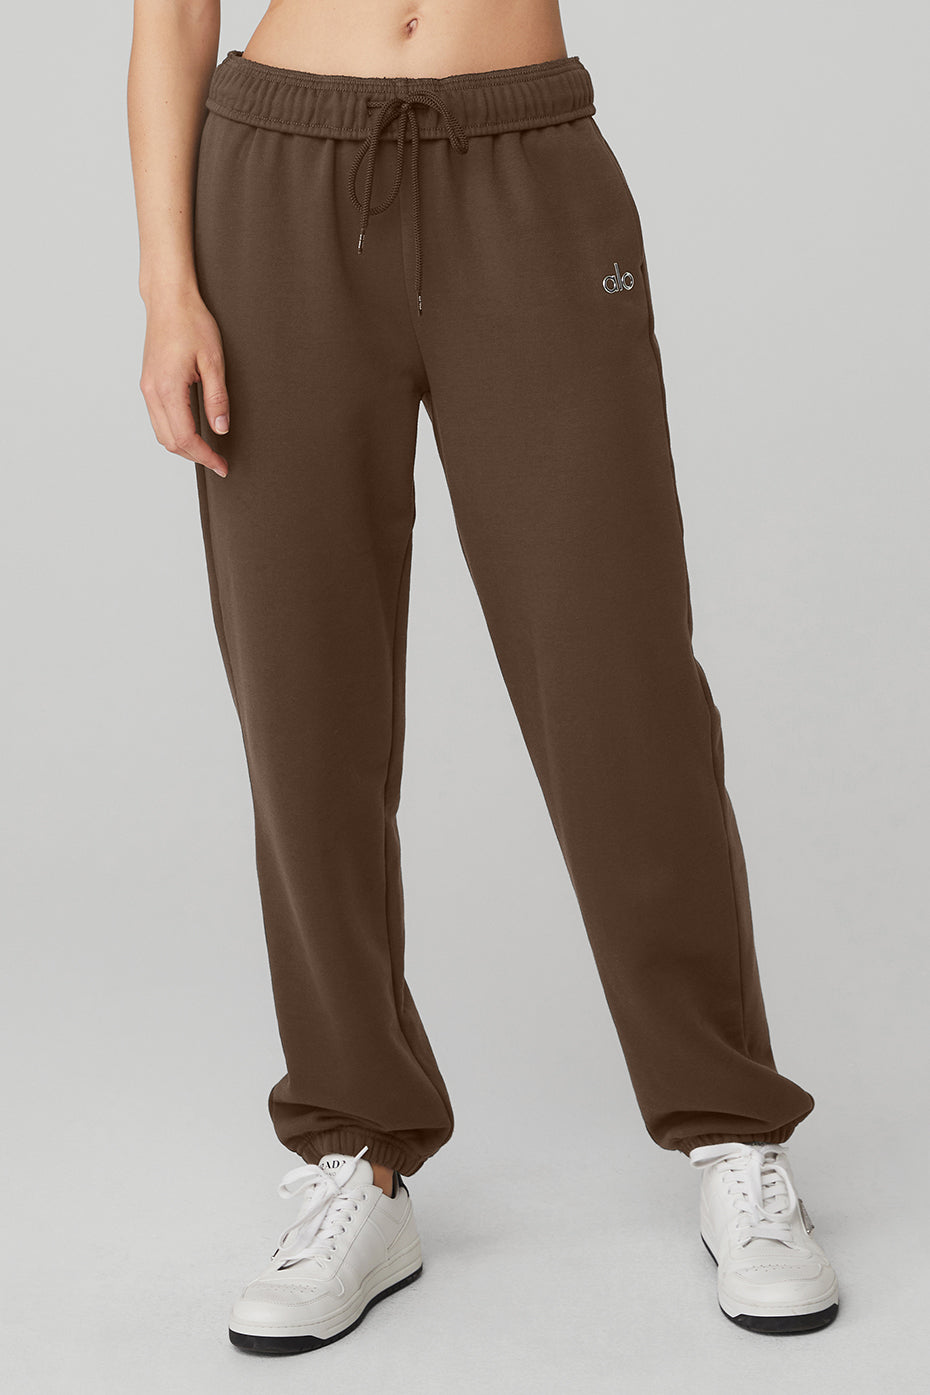 Accolade Sweatpant in Espresso by Alo Yoga - Work Well Daily